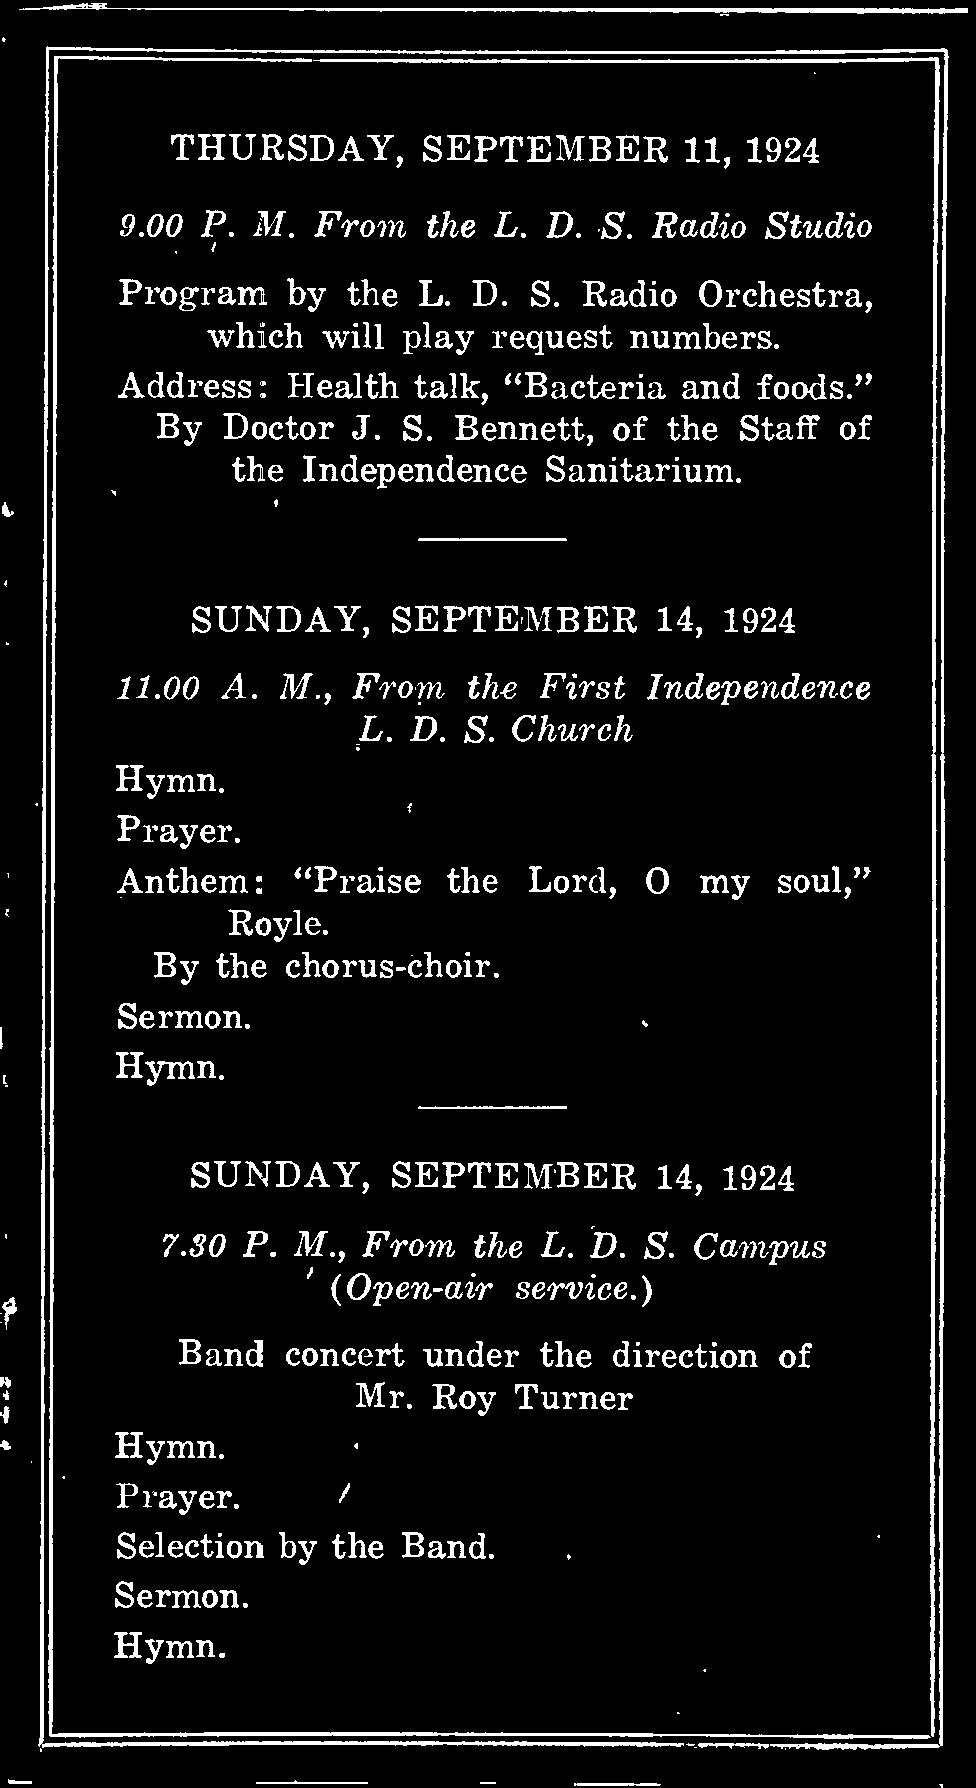 M., From the First Independence L. D. S. Church Prayer. Anthem: "Praise the Lord, O my soul," Royle. By the chorus -choir. Sermon.